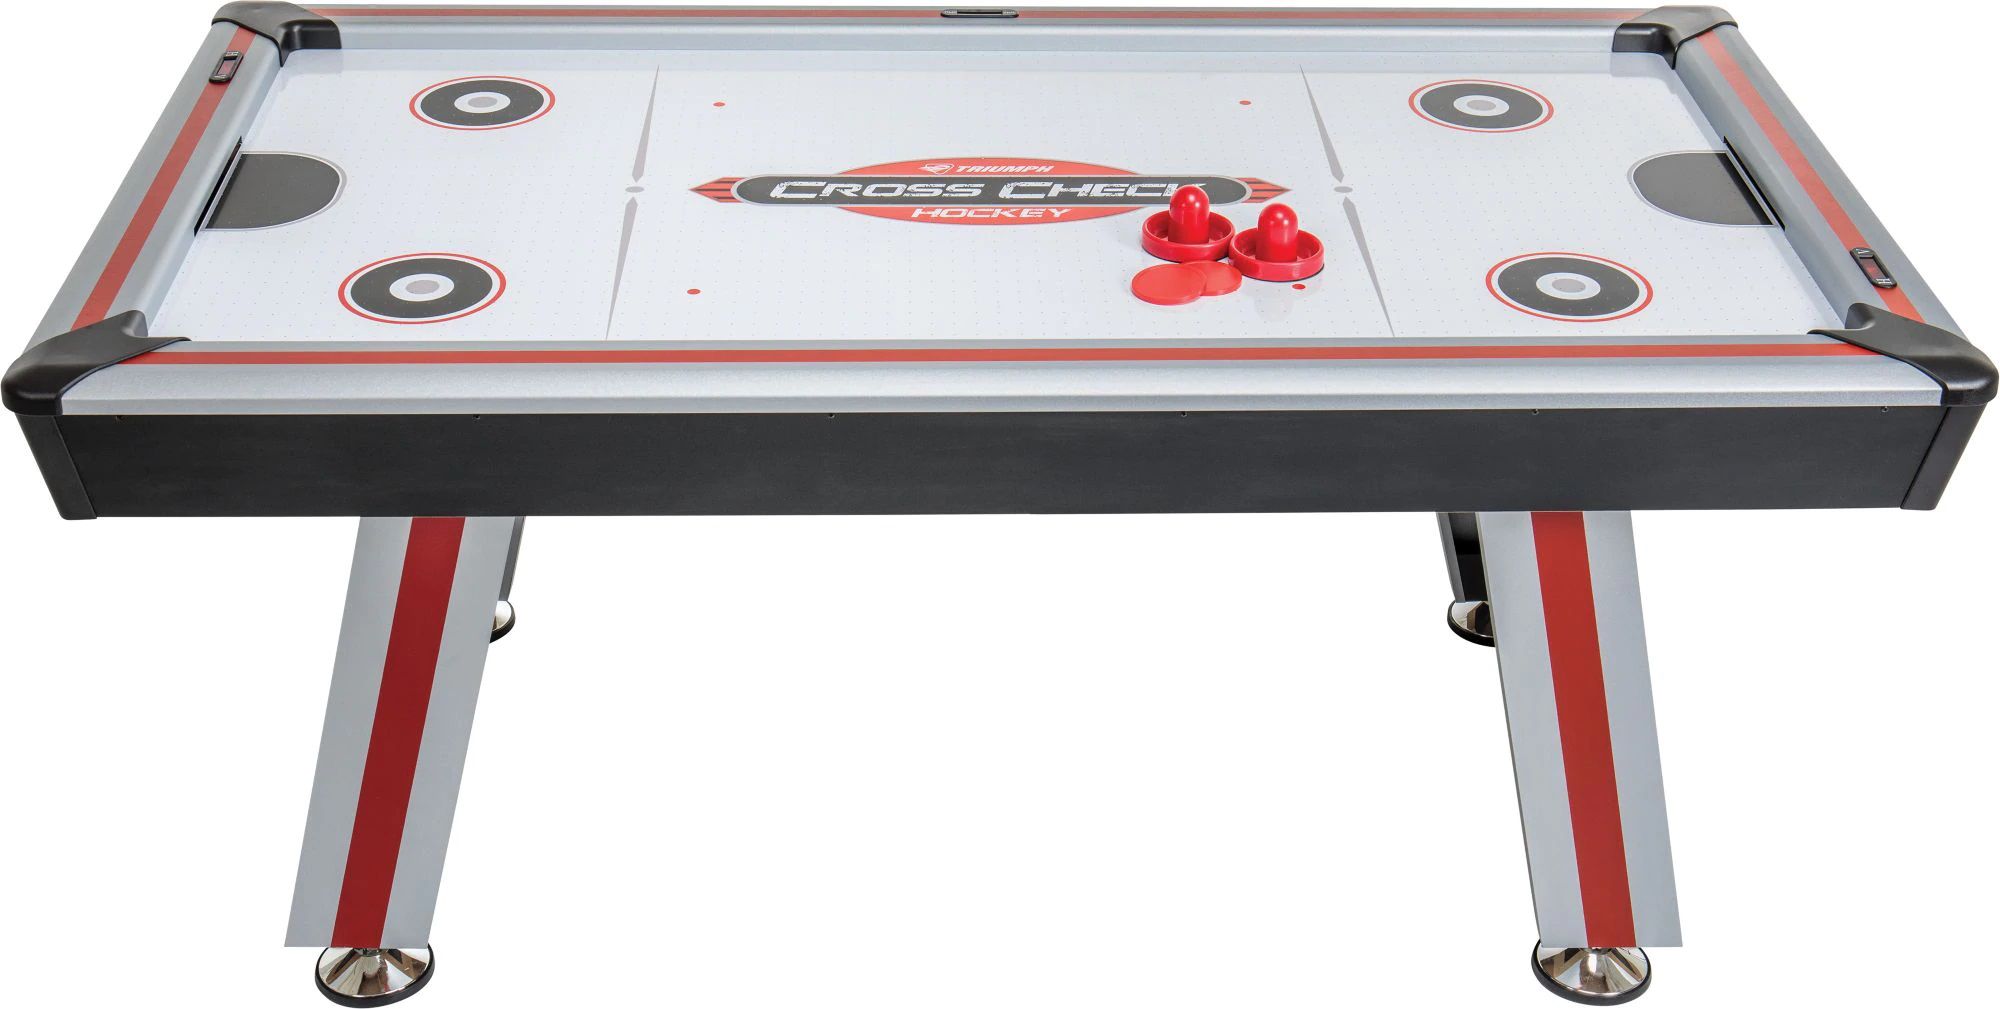 TRIUMPH CROSSCHECK 72" AIR HOCKEY TABLE BRAND NEW FACTORY SEALED BOX!